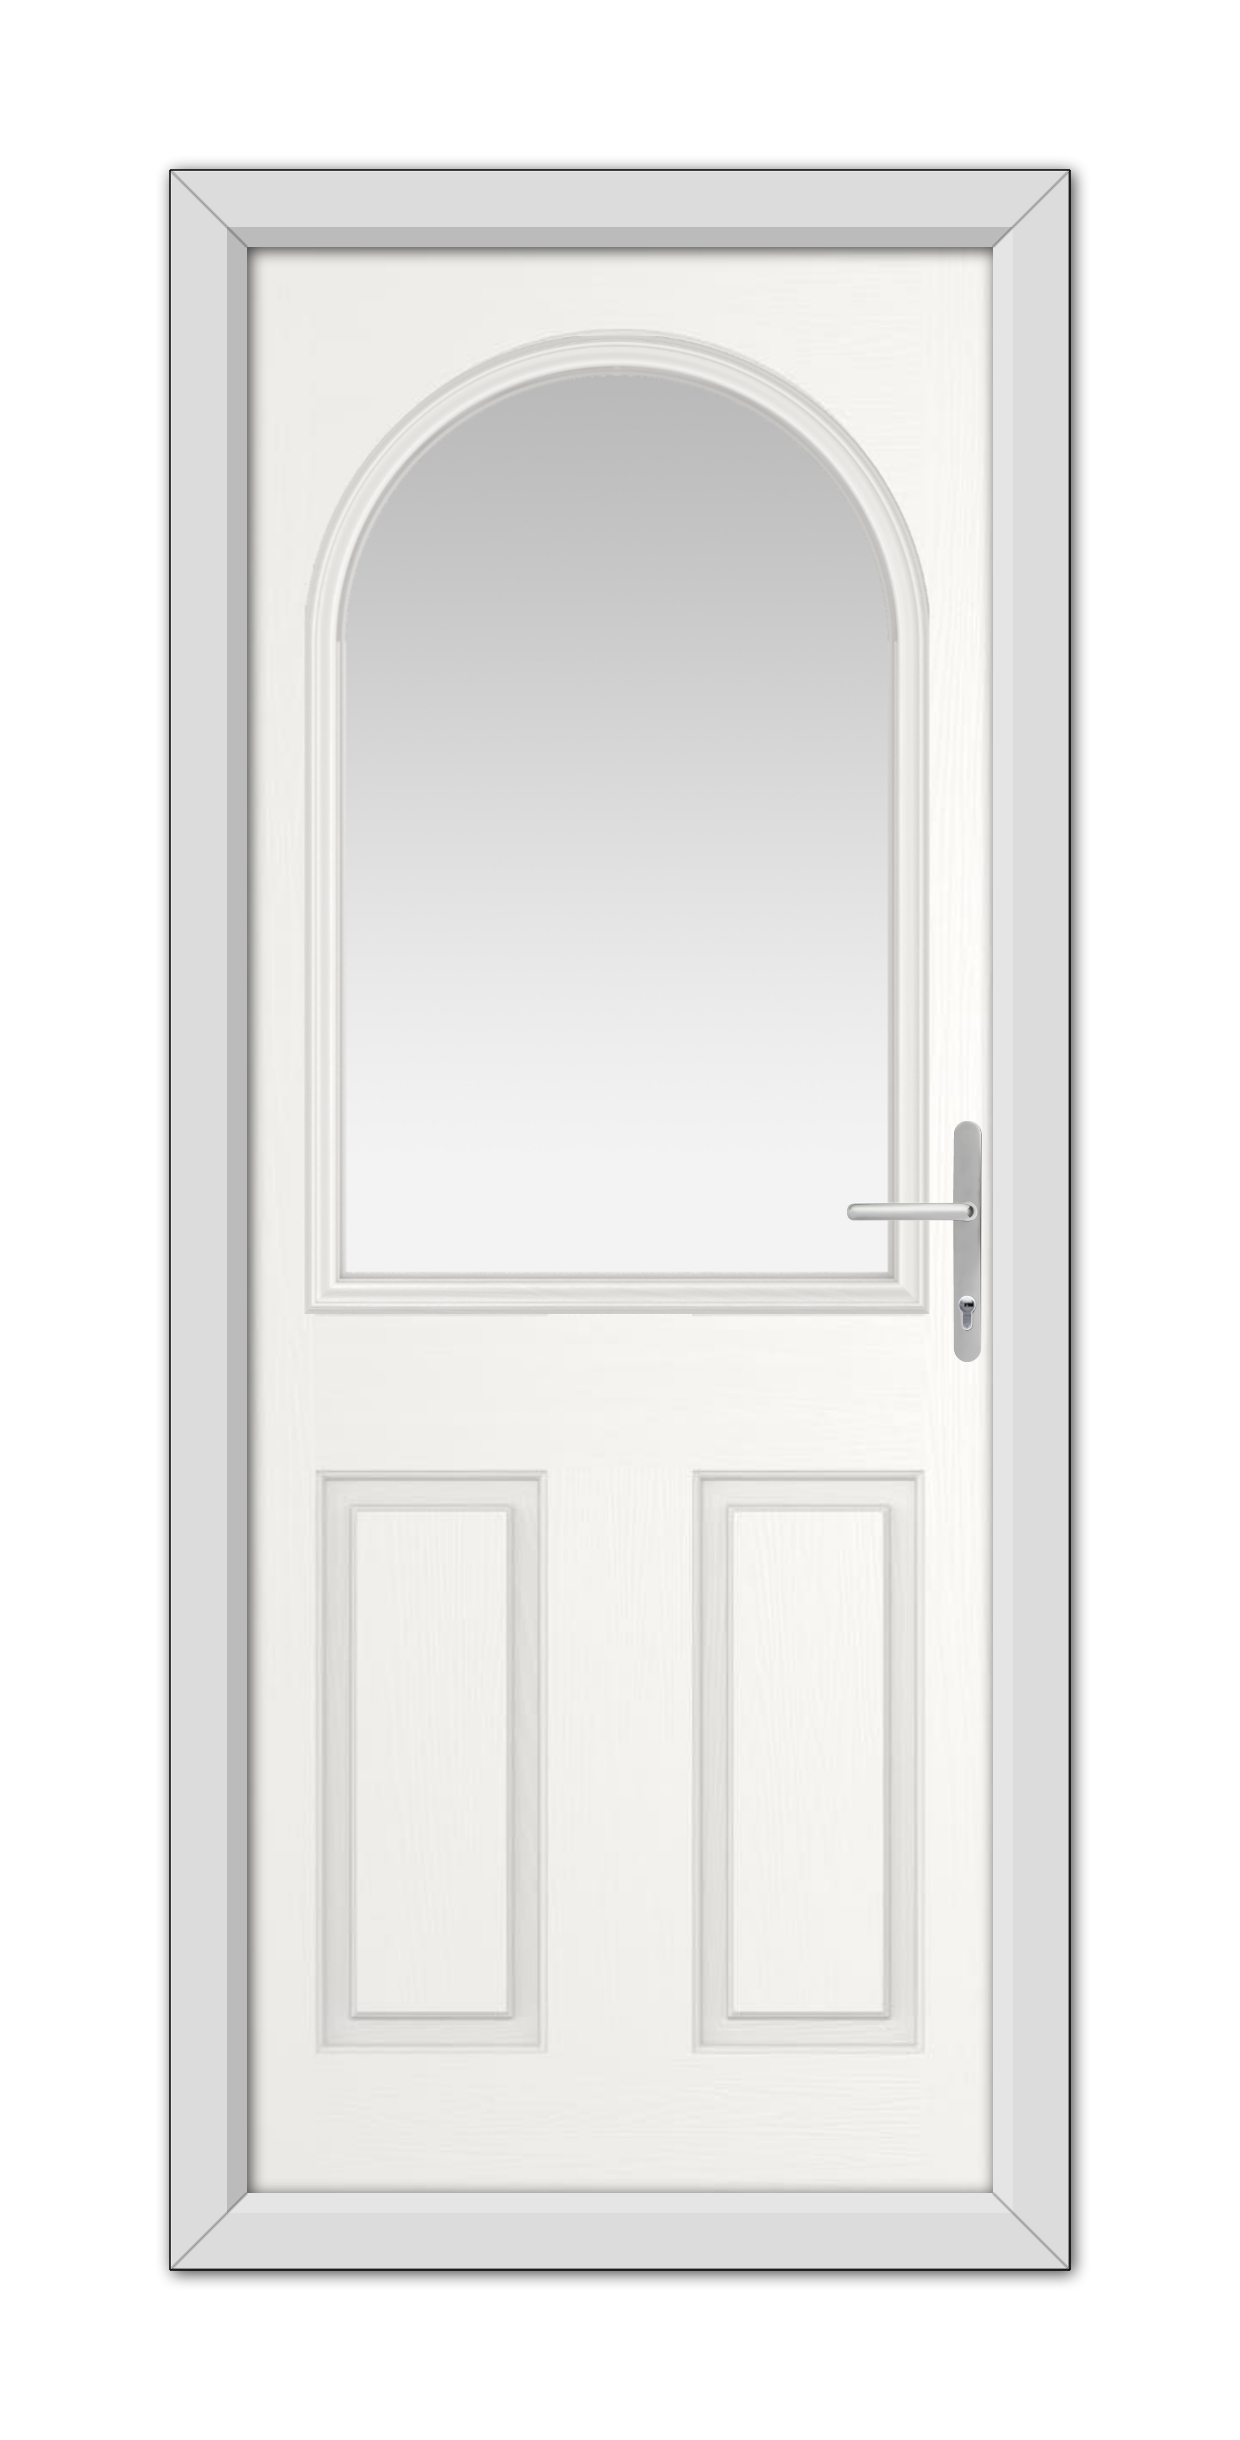 White Grafton Composite Door 48mm Timber Core with an arched window at the top and a modern handle, set within a simple frame, isolated on a white background.